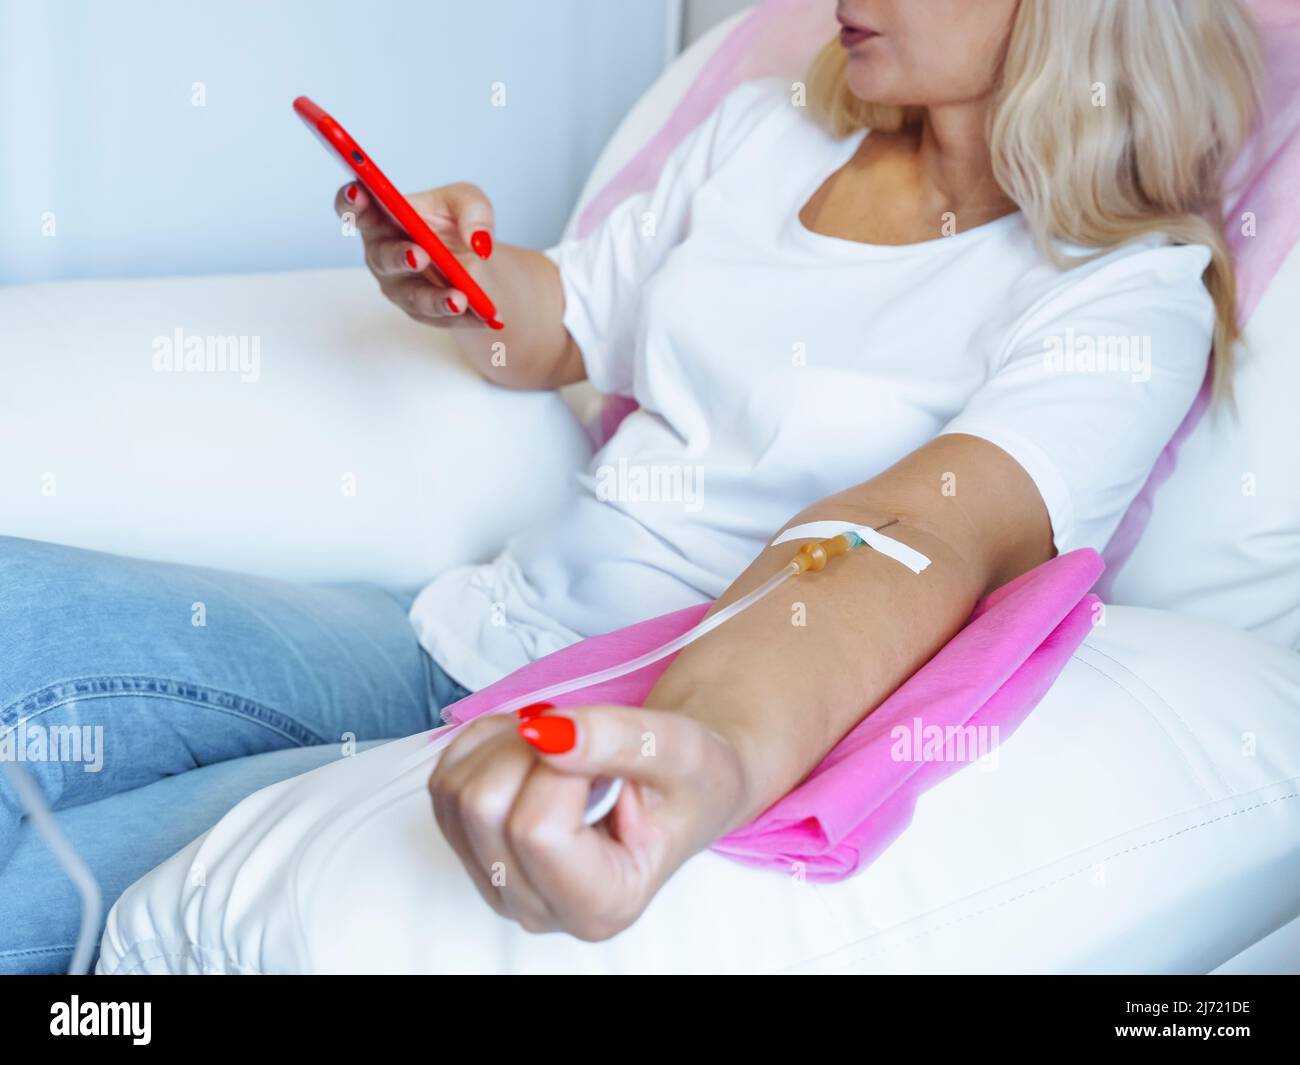 Woman Donor looking at mobile phone while needle is in arm , Closeup of arm with needle inserted into arm Stock Photo